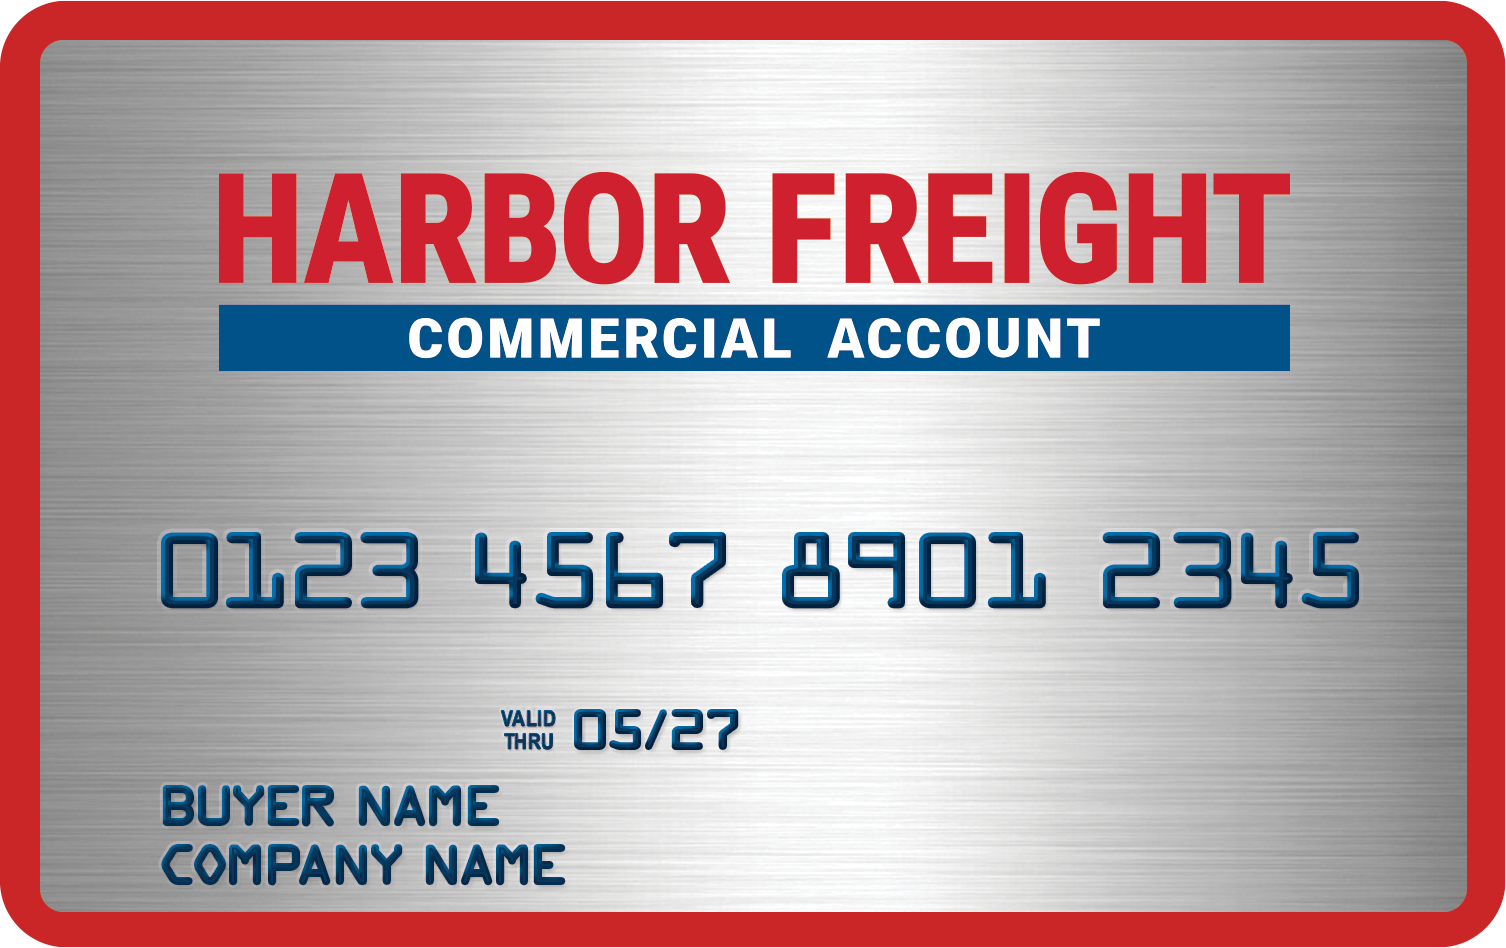 National Retailer Harbor Freight Tools Partners with TreviPay to